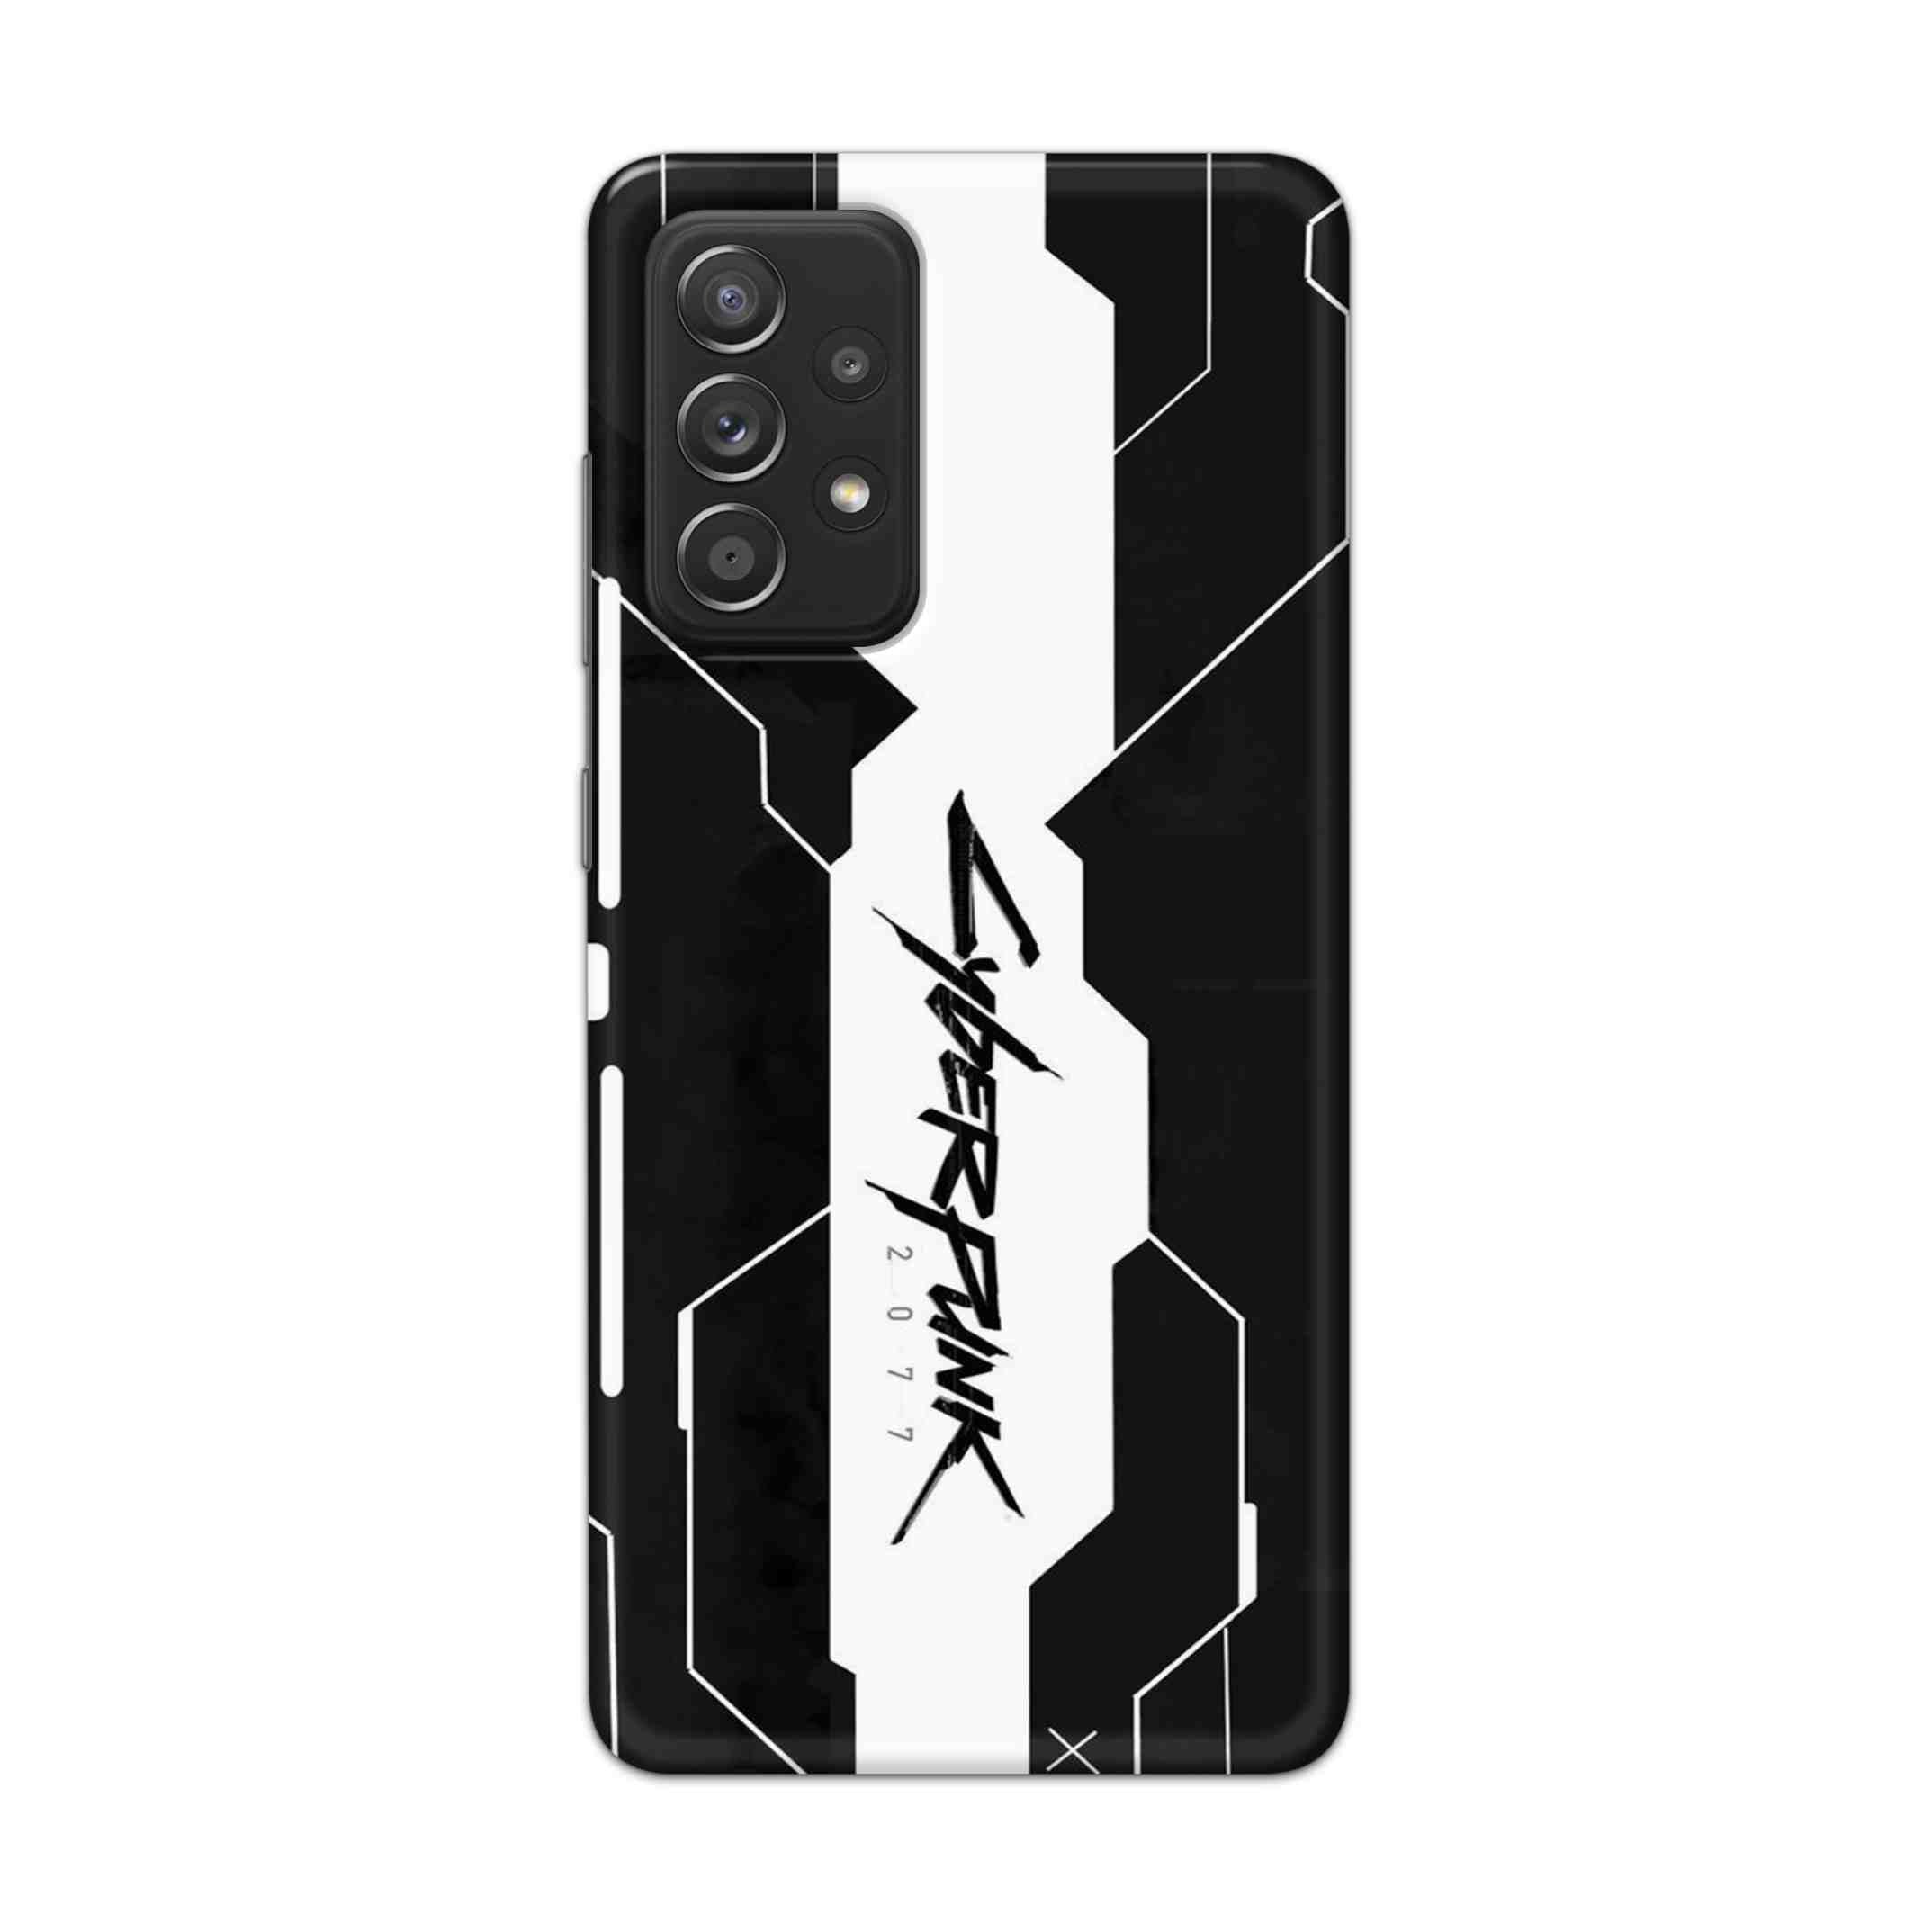 Buy Cyberpunk 2077 Art Hard Back Mobile Phone Case Cover For Samsung Galaxy A52 Online